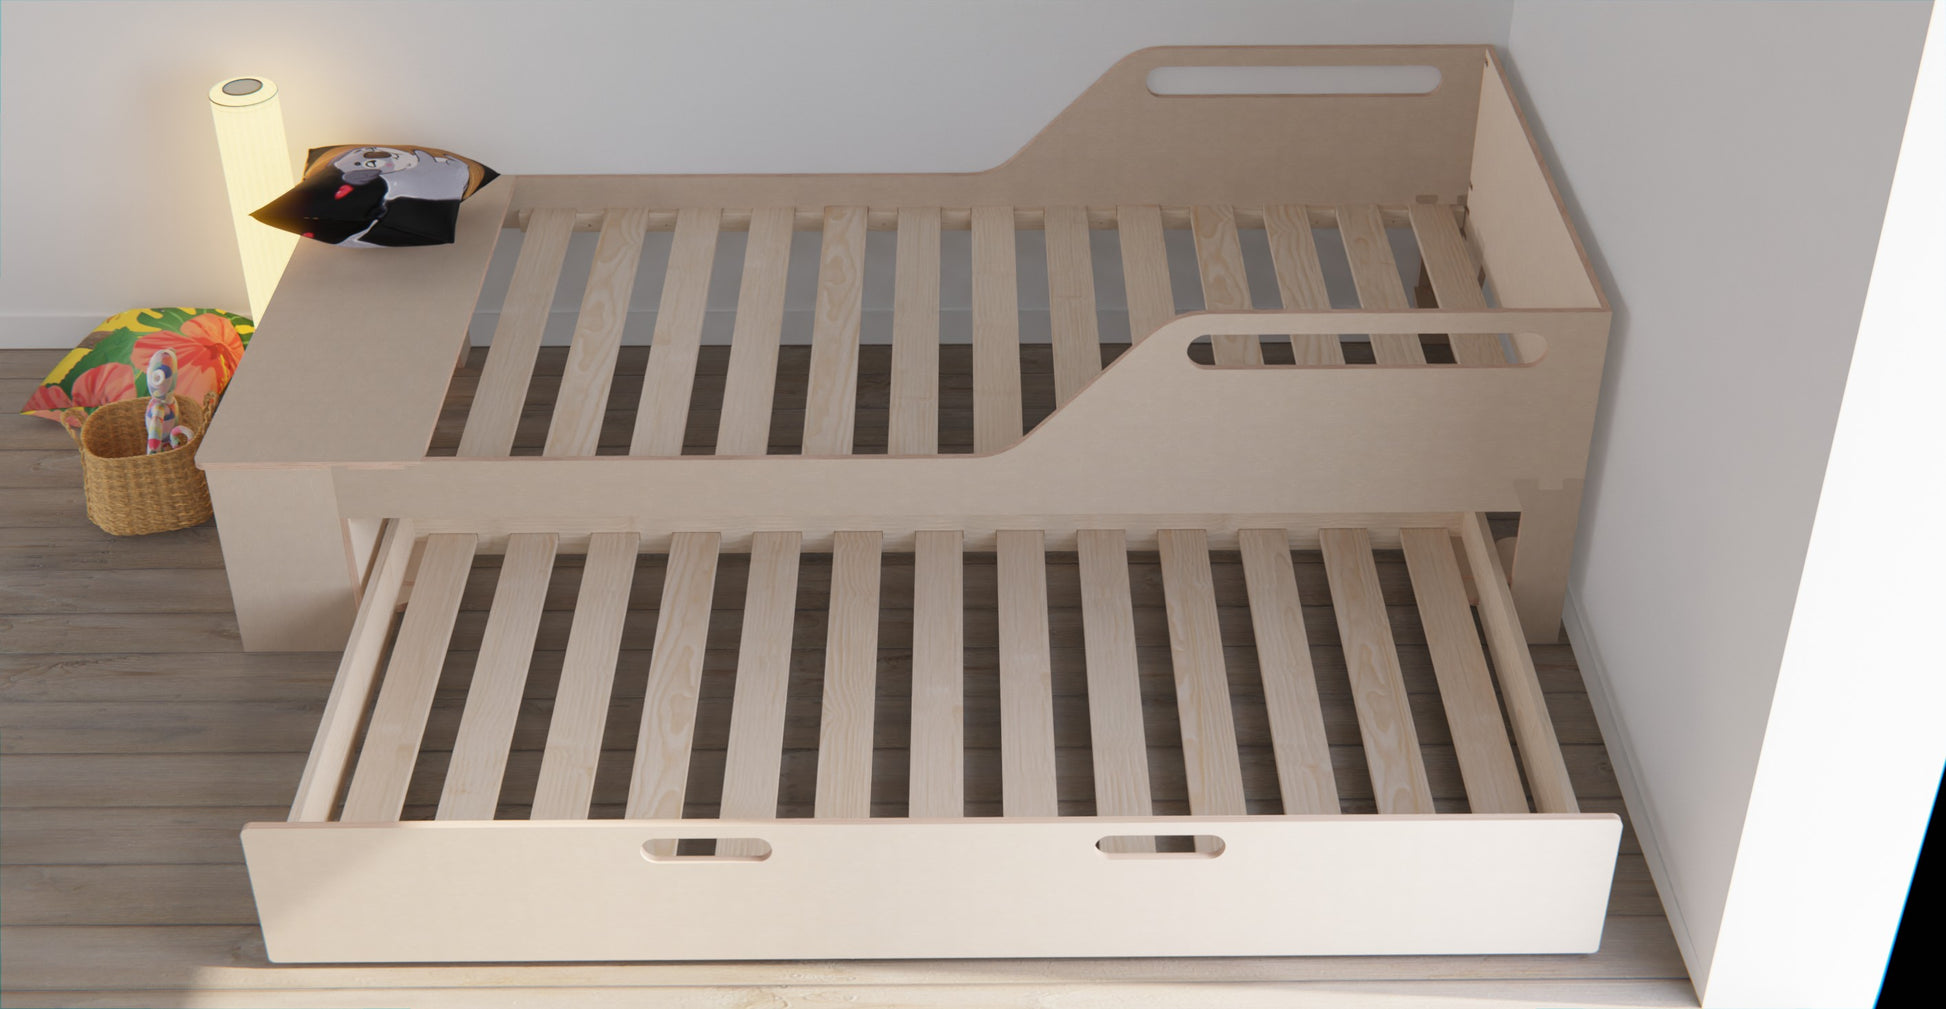 Elevate your home with a timeless wooden bed frame, complete with a trundle bed and handy storage shelf.